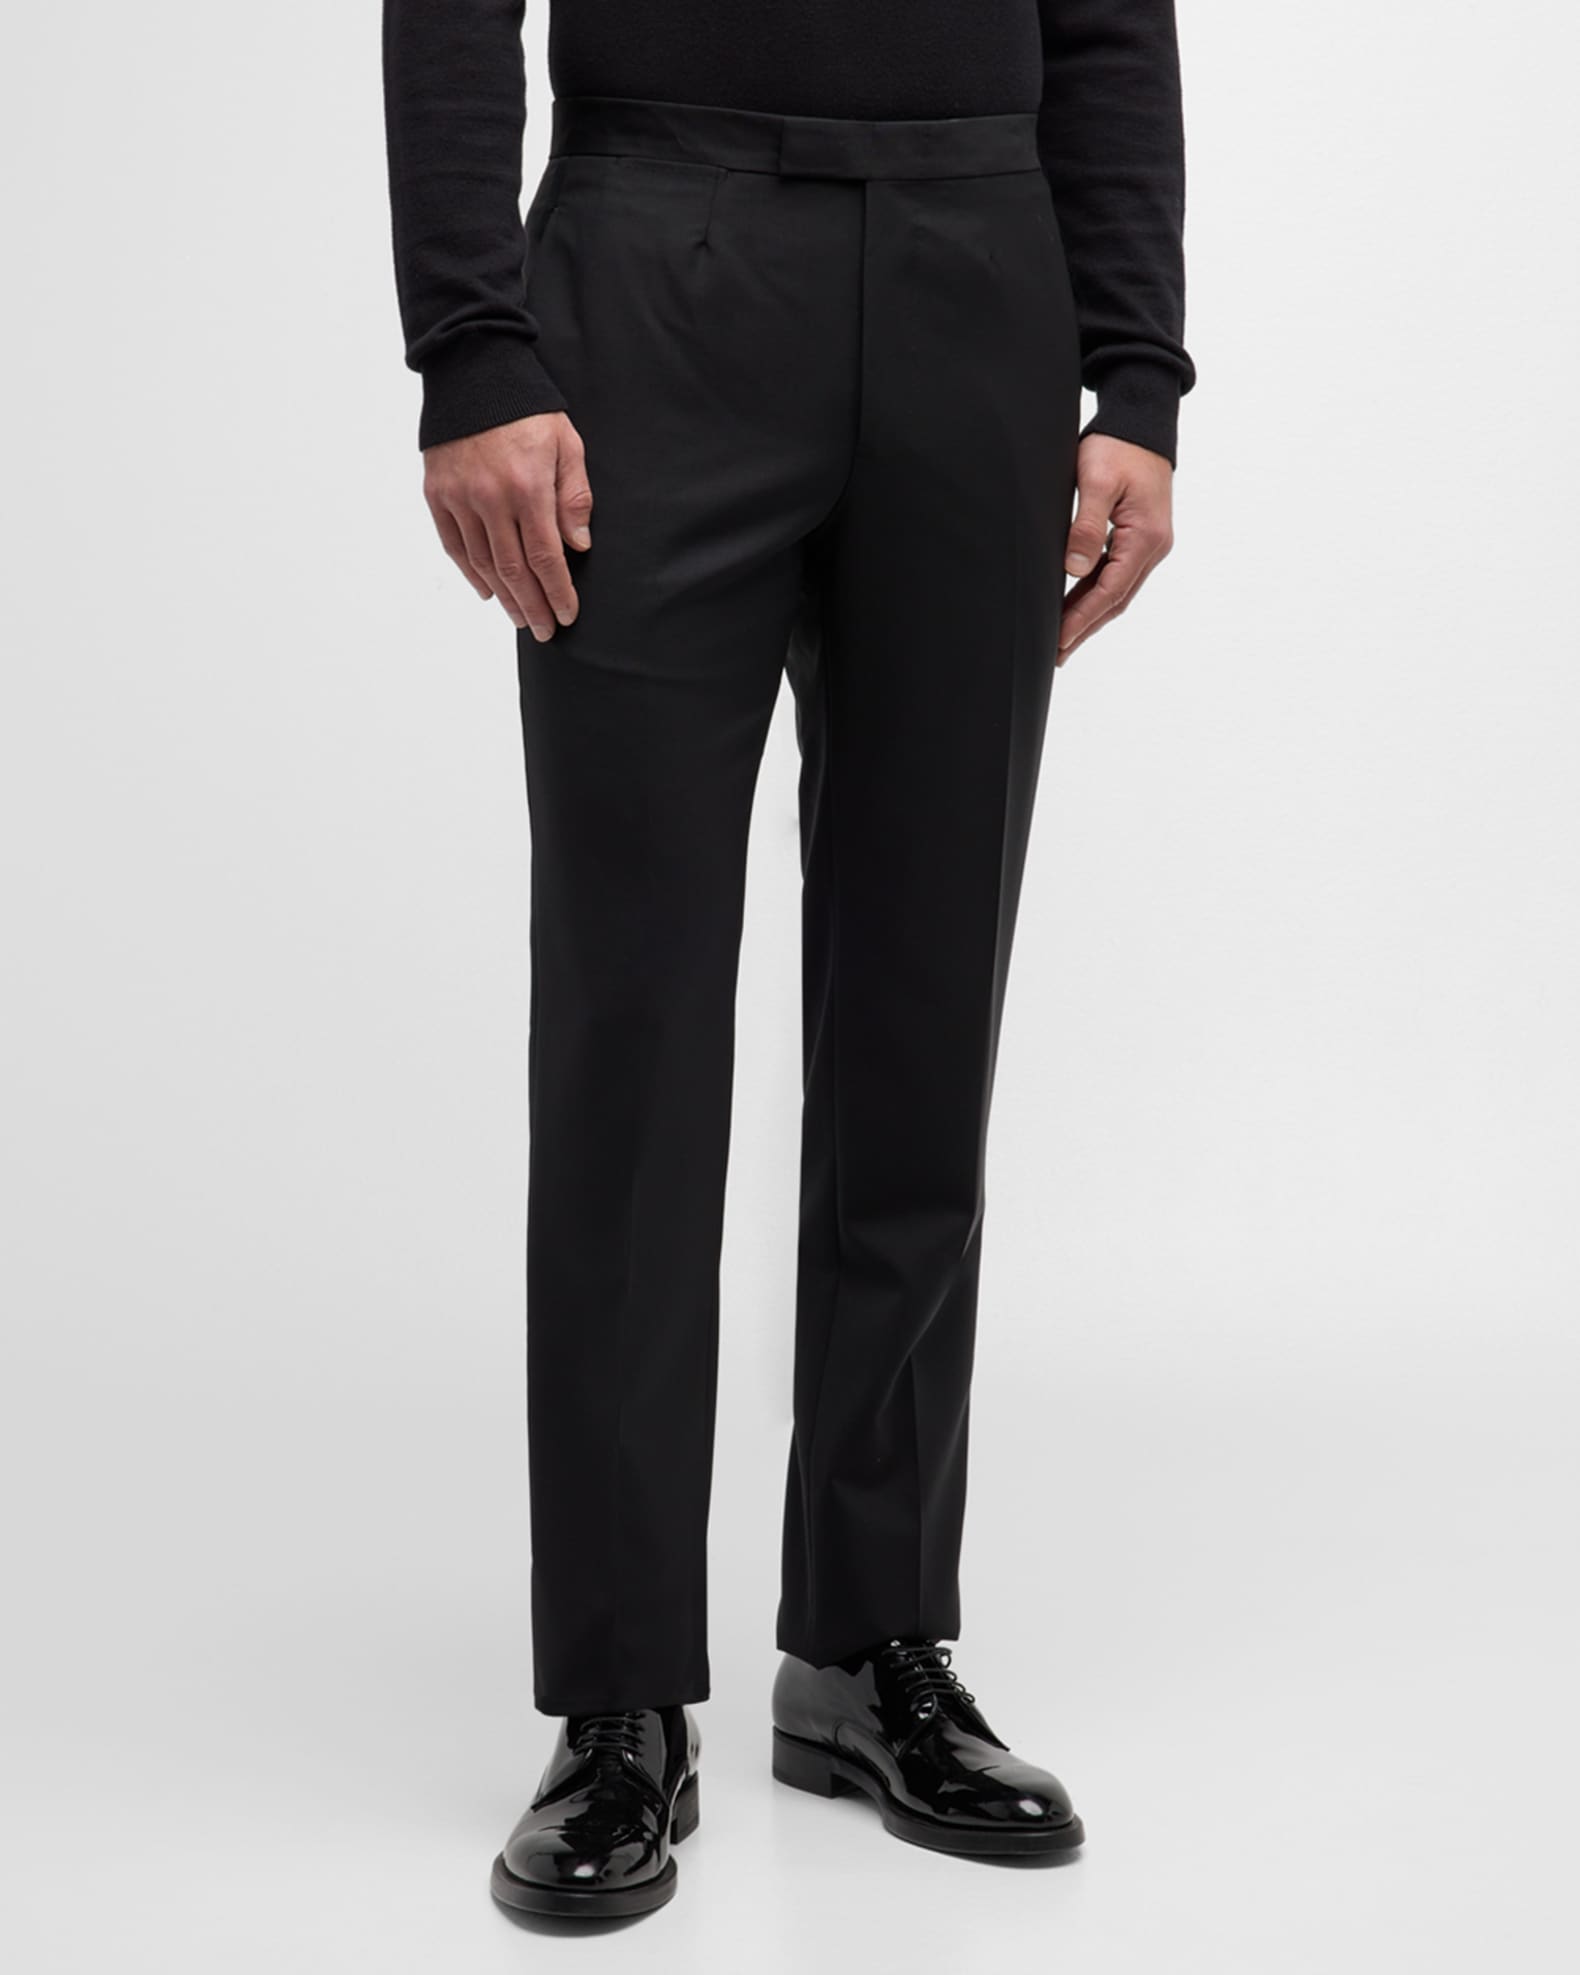 Mohair and wool straight pants in black - Gucci